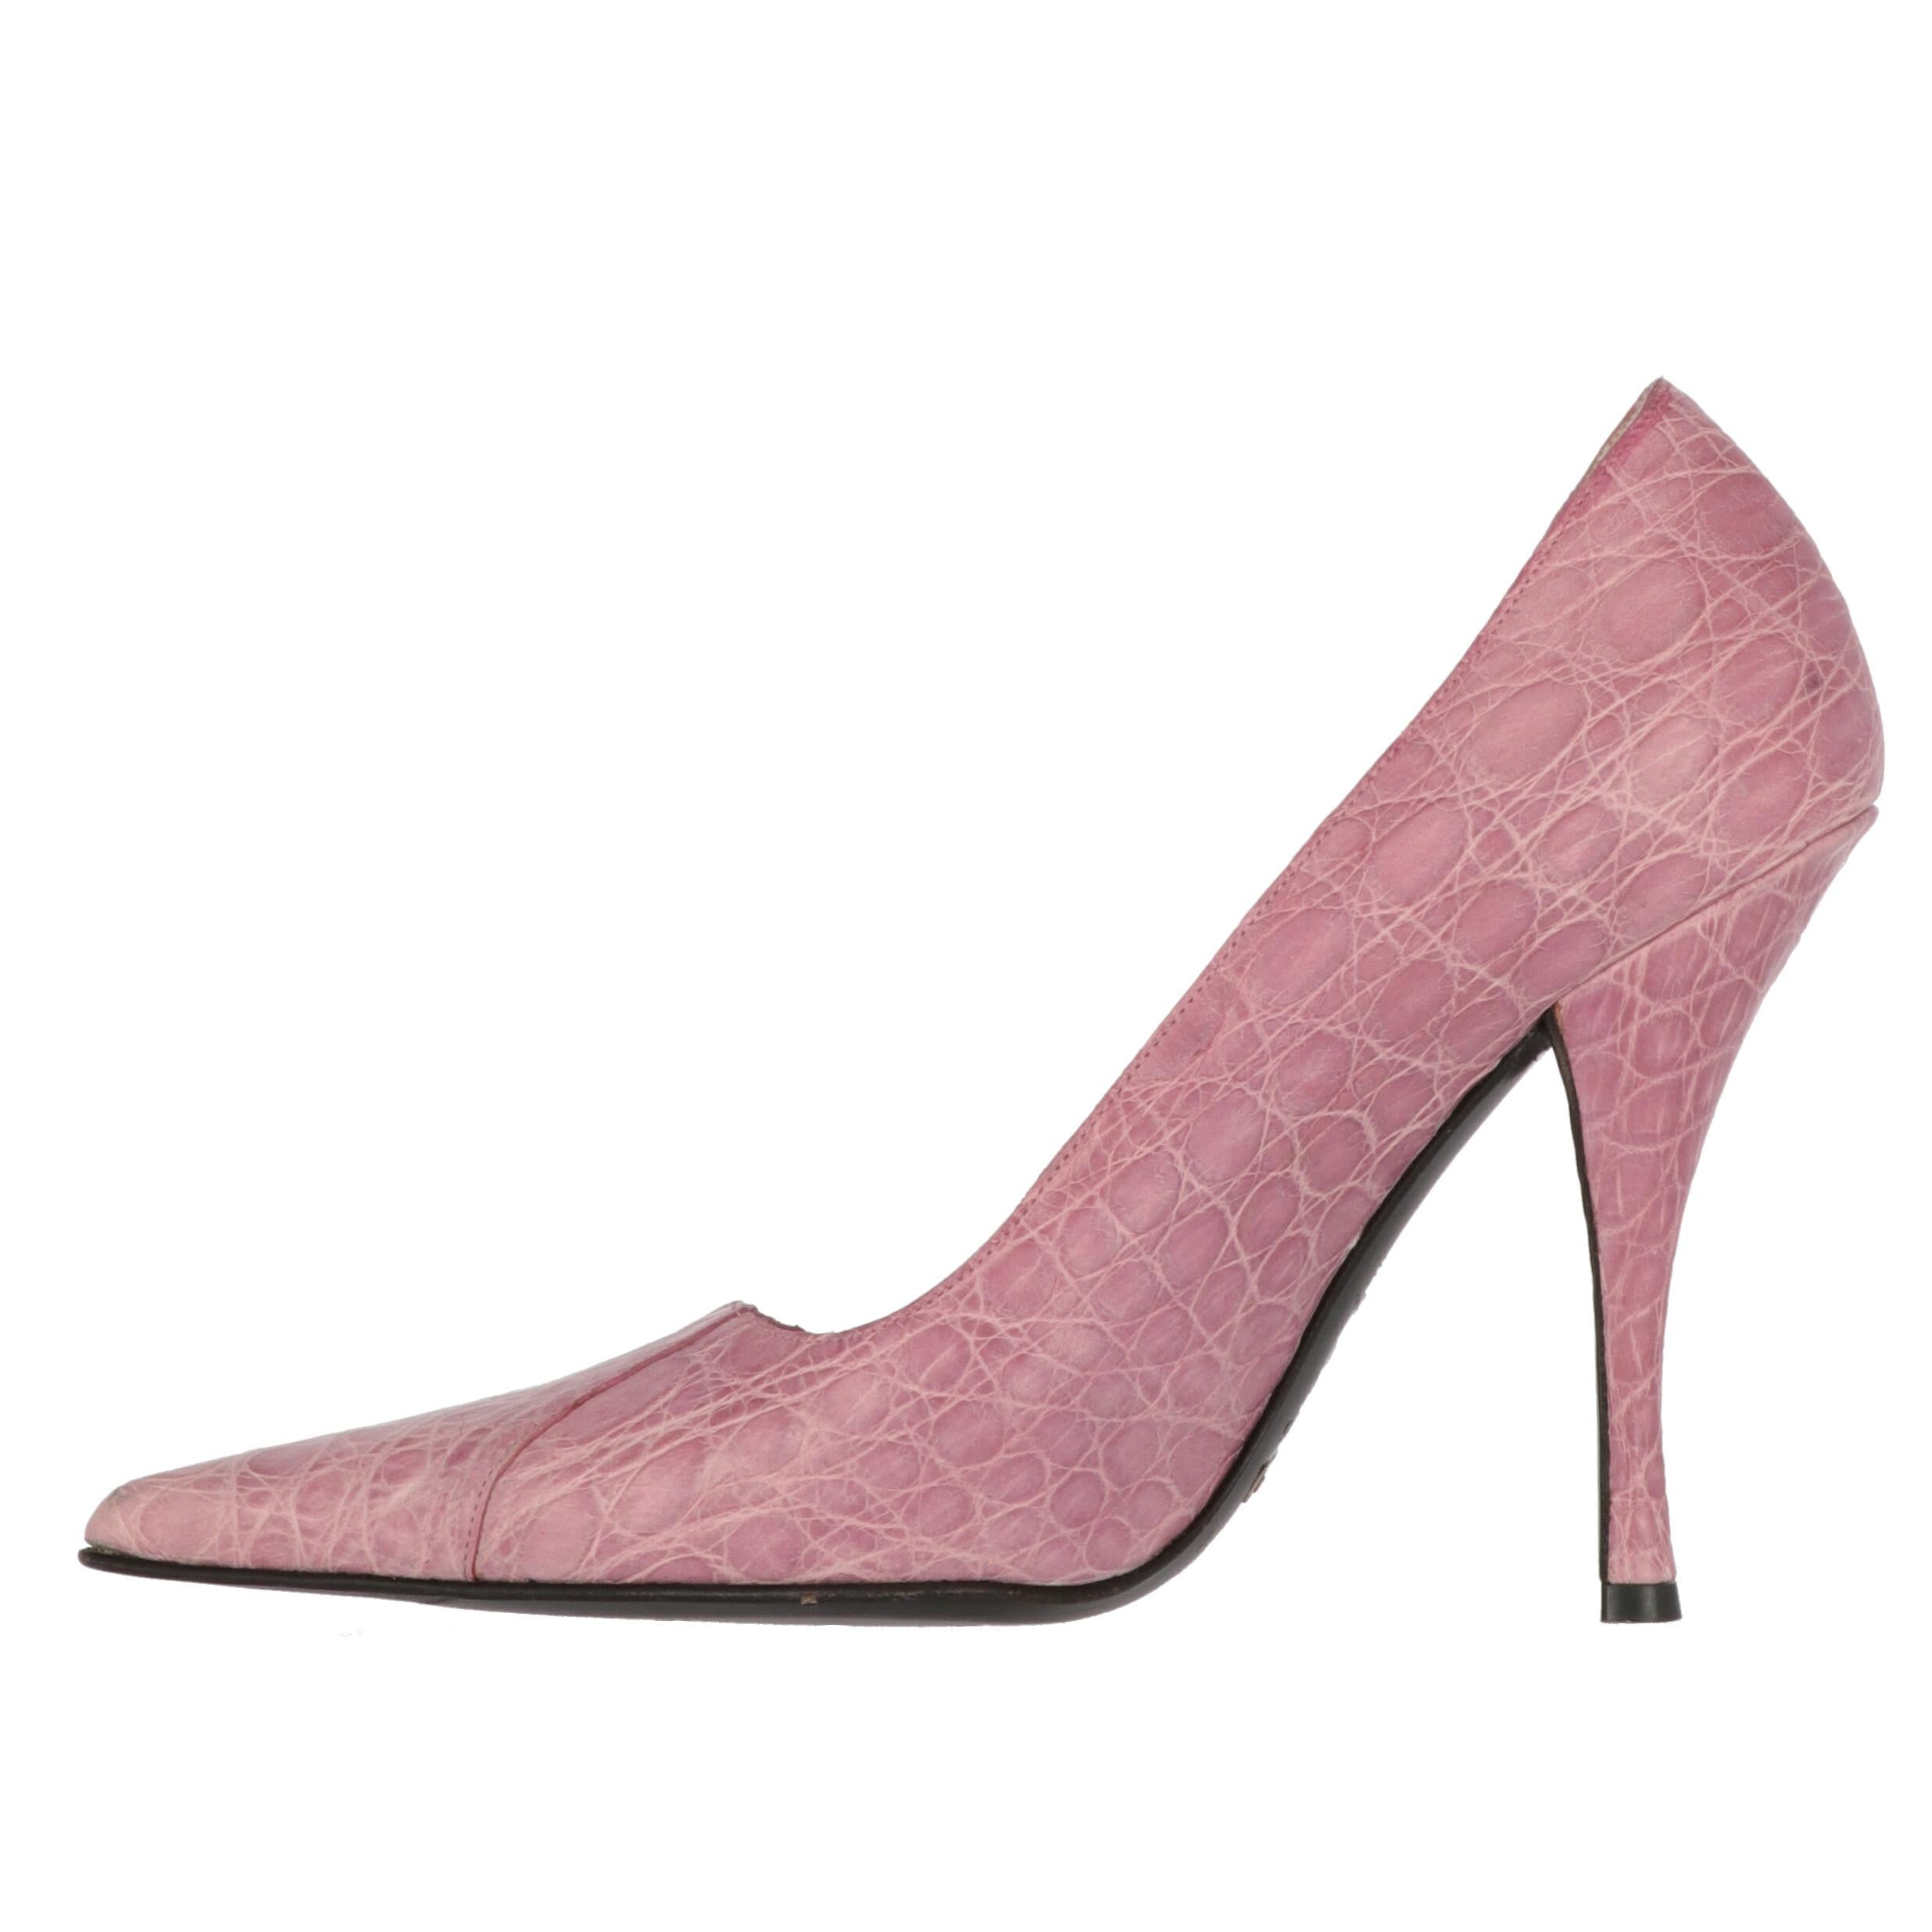 Dolce & Gabbana crocodile print pink genuine leather pumps. Fashionable piece with stiletto heel and pointed toe.
The item shows some light signs of wear on the leather and the toe, as shown in the pictures.

Years: 2000s

Made in Italy

Size: 38